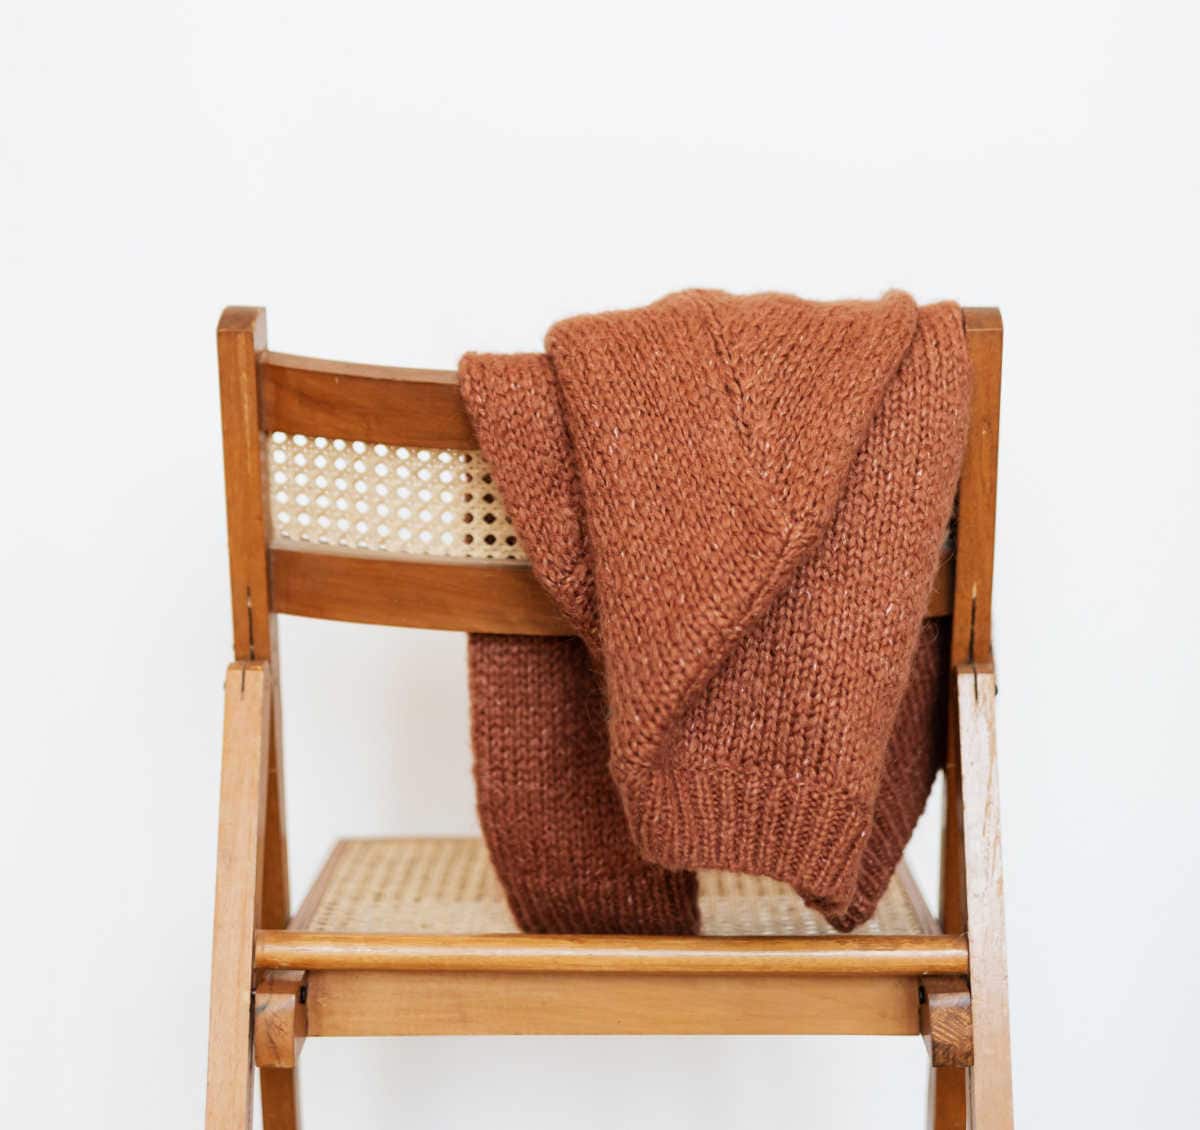 Rust coloured wool sweater on the back of a wooden chair.